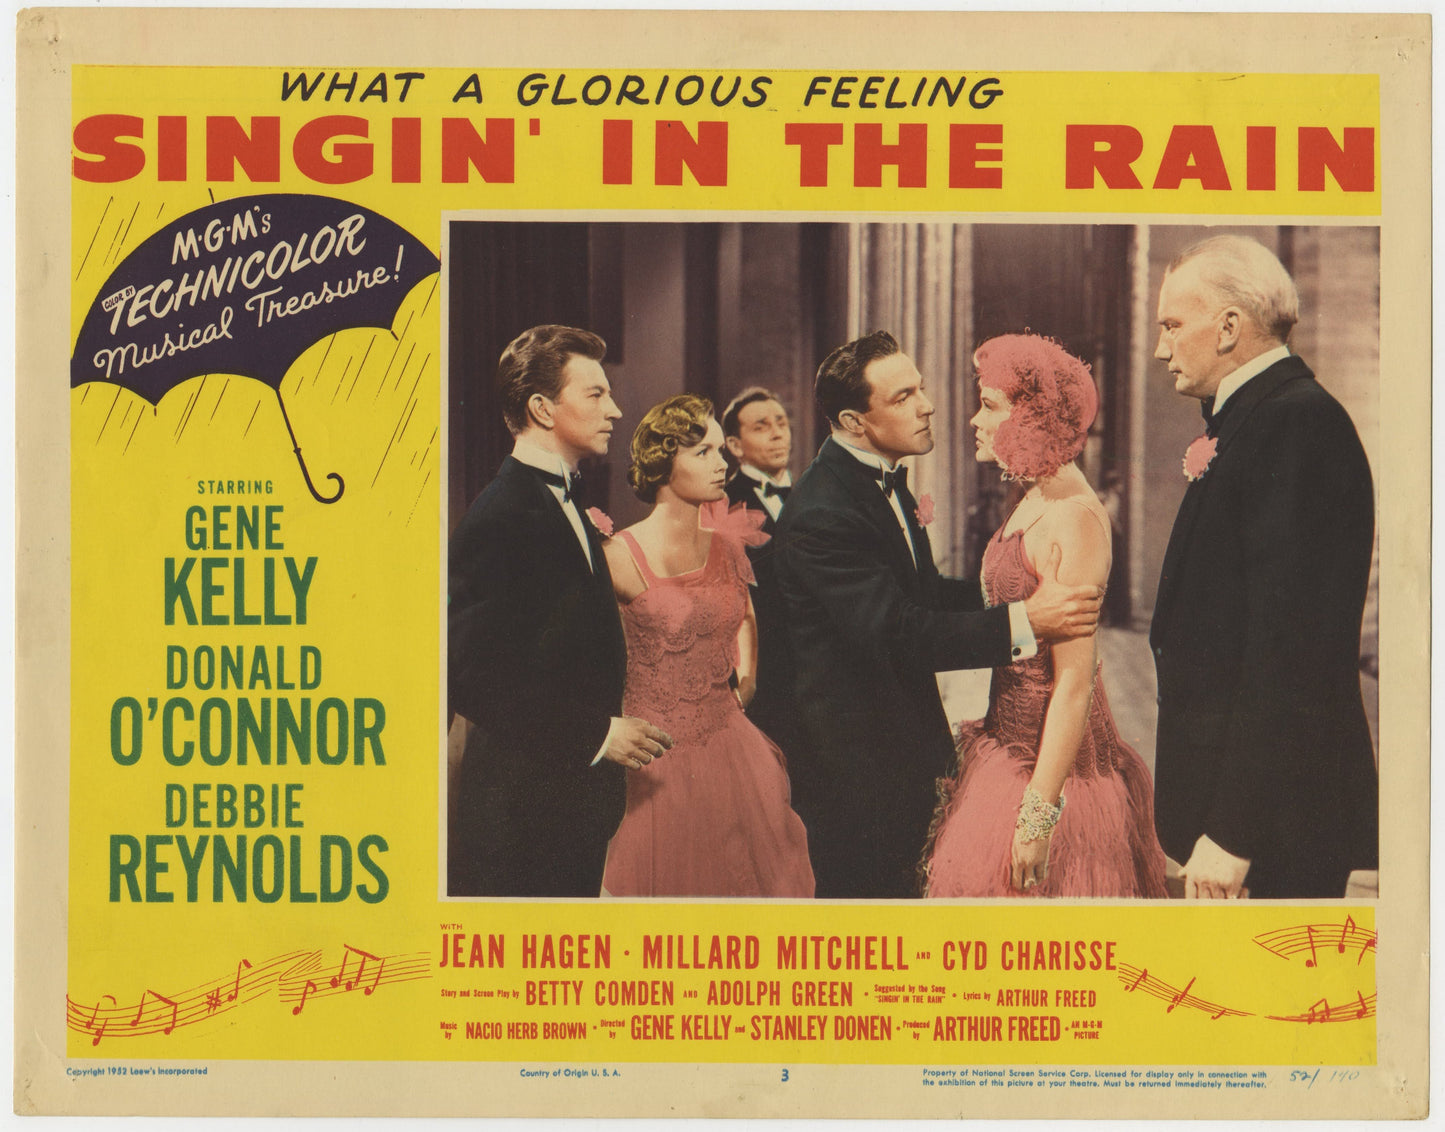 Singin' In The Rain US Lobby Card #3 (1952) - ORIGINAL RELEASE - posterpalace.com